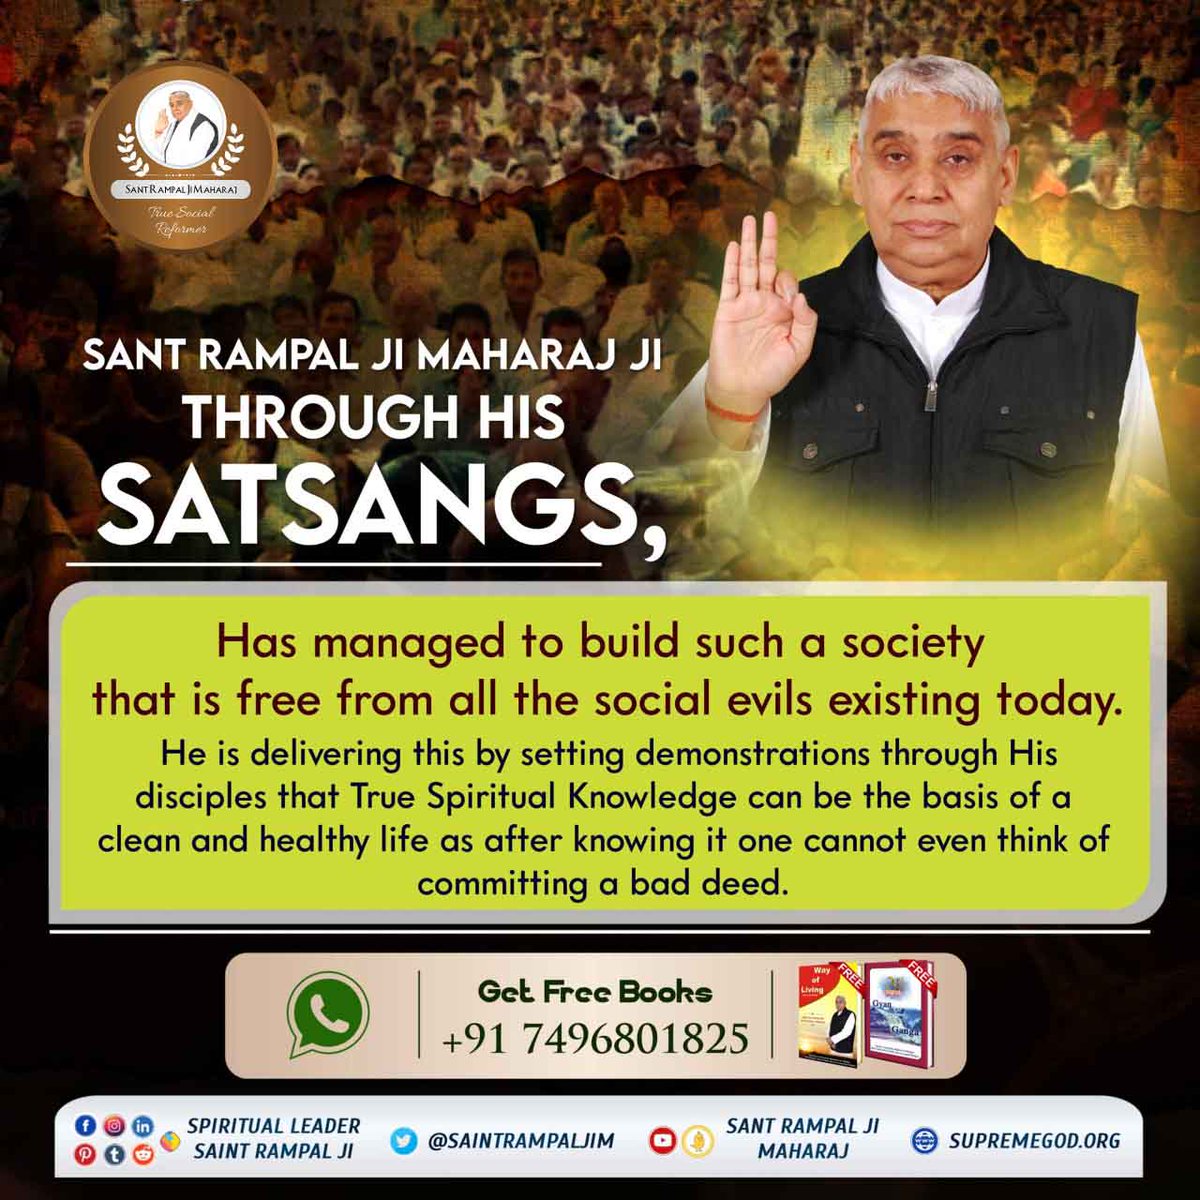 SANT RAMPAL JI MAHARAJ JI THROUGH HIS SATSANGS,

Has managed to build such a society that is free from all the social evils existing today.
.
.
:-  Sant Rampal Ji Maharaj ji
#GodNightMonday
#SantRampalJiBodhDiwas